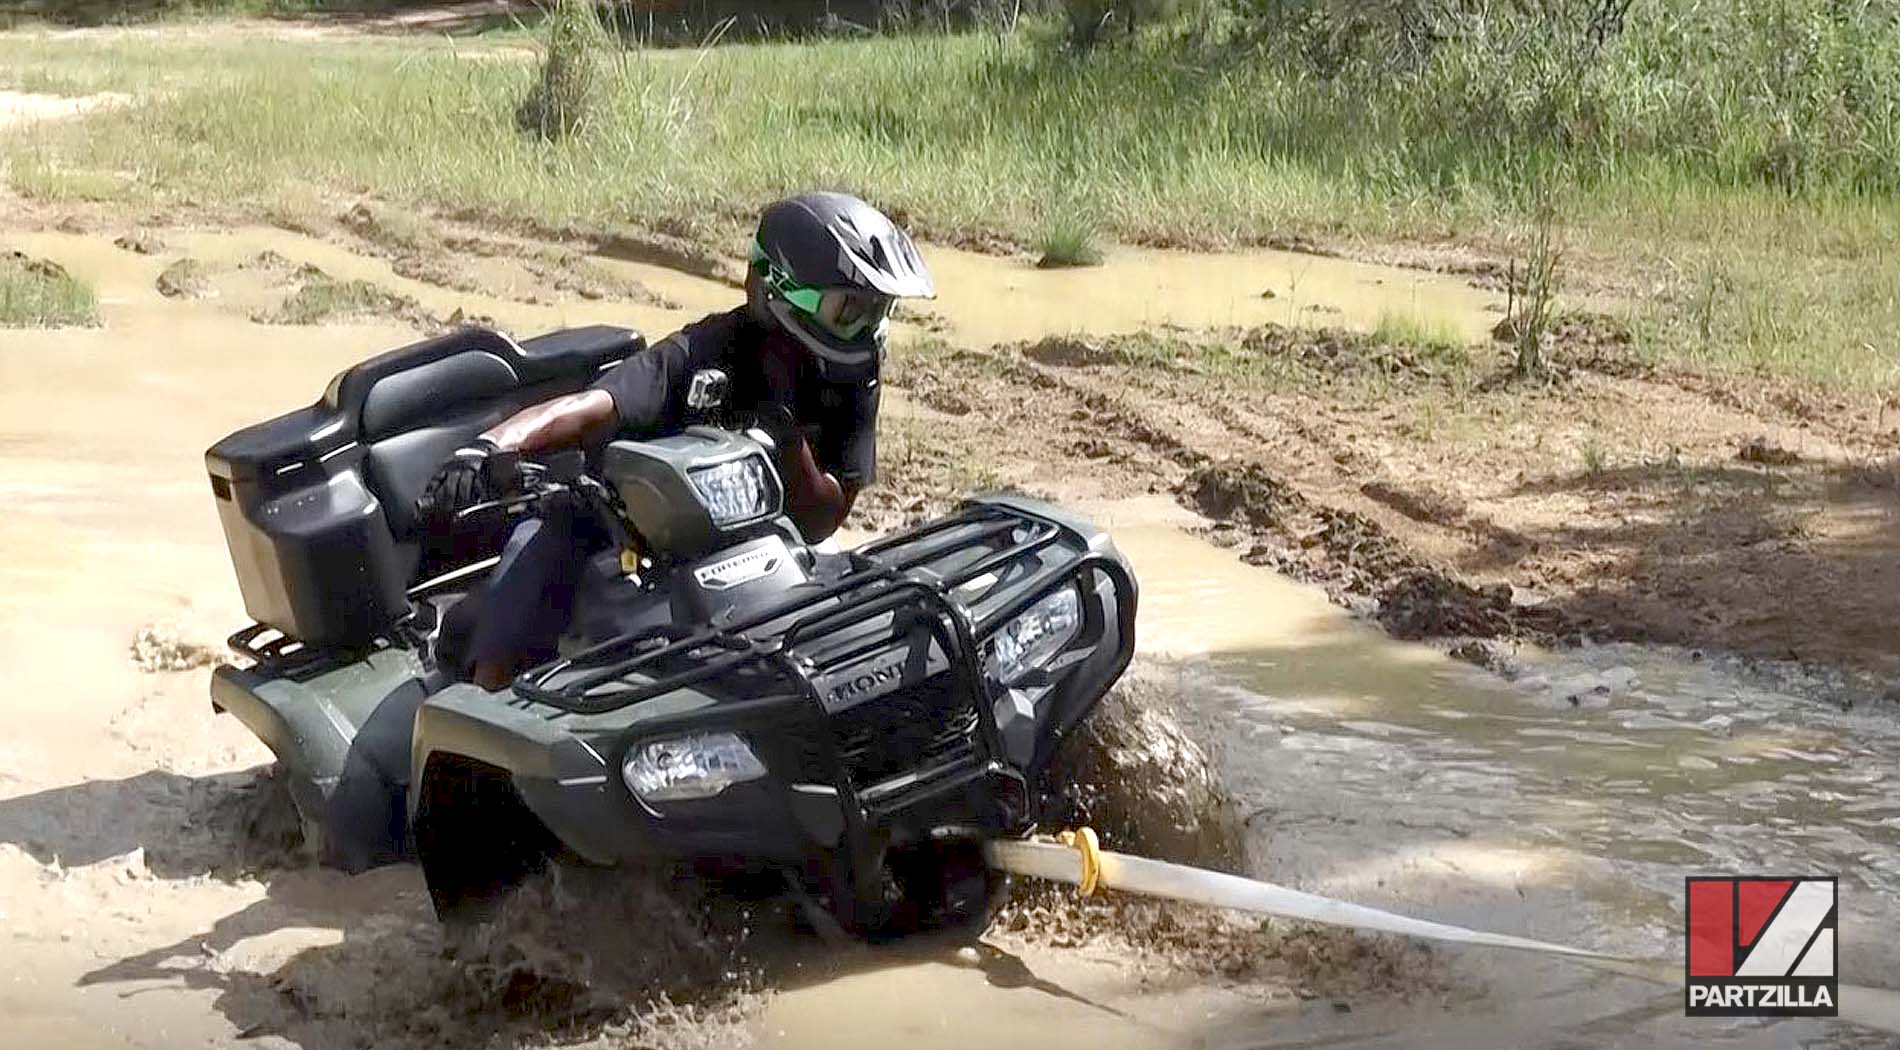 ATV stuck in mud use tow straps